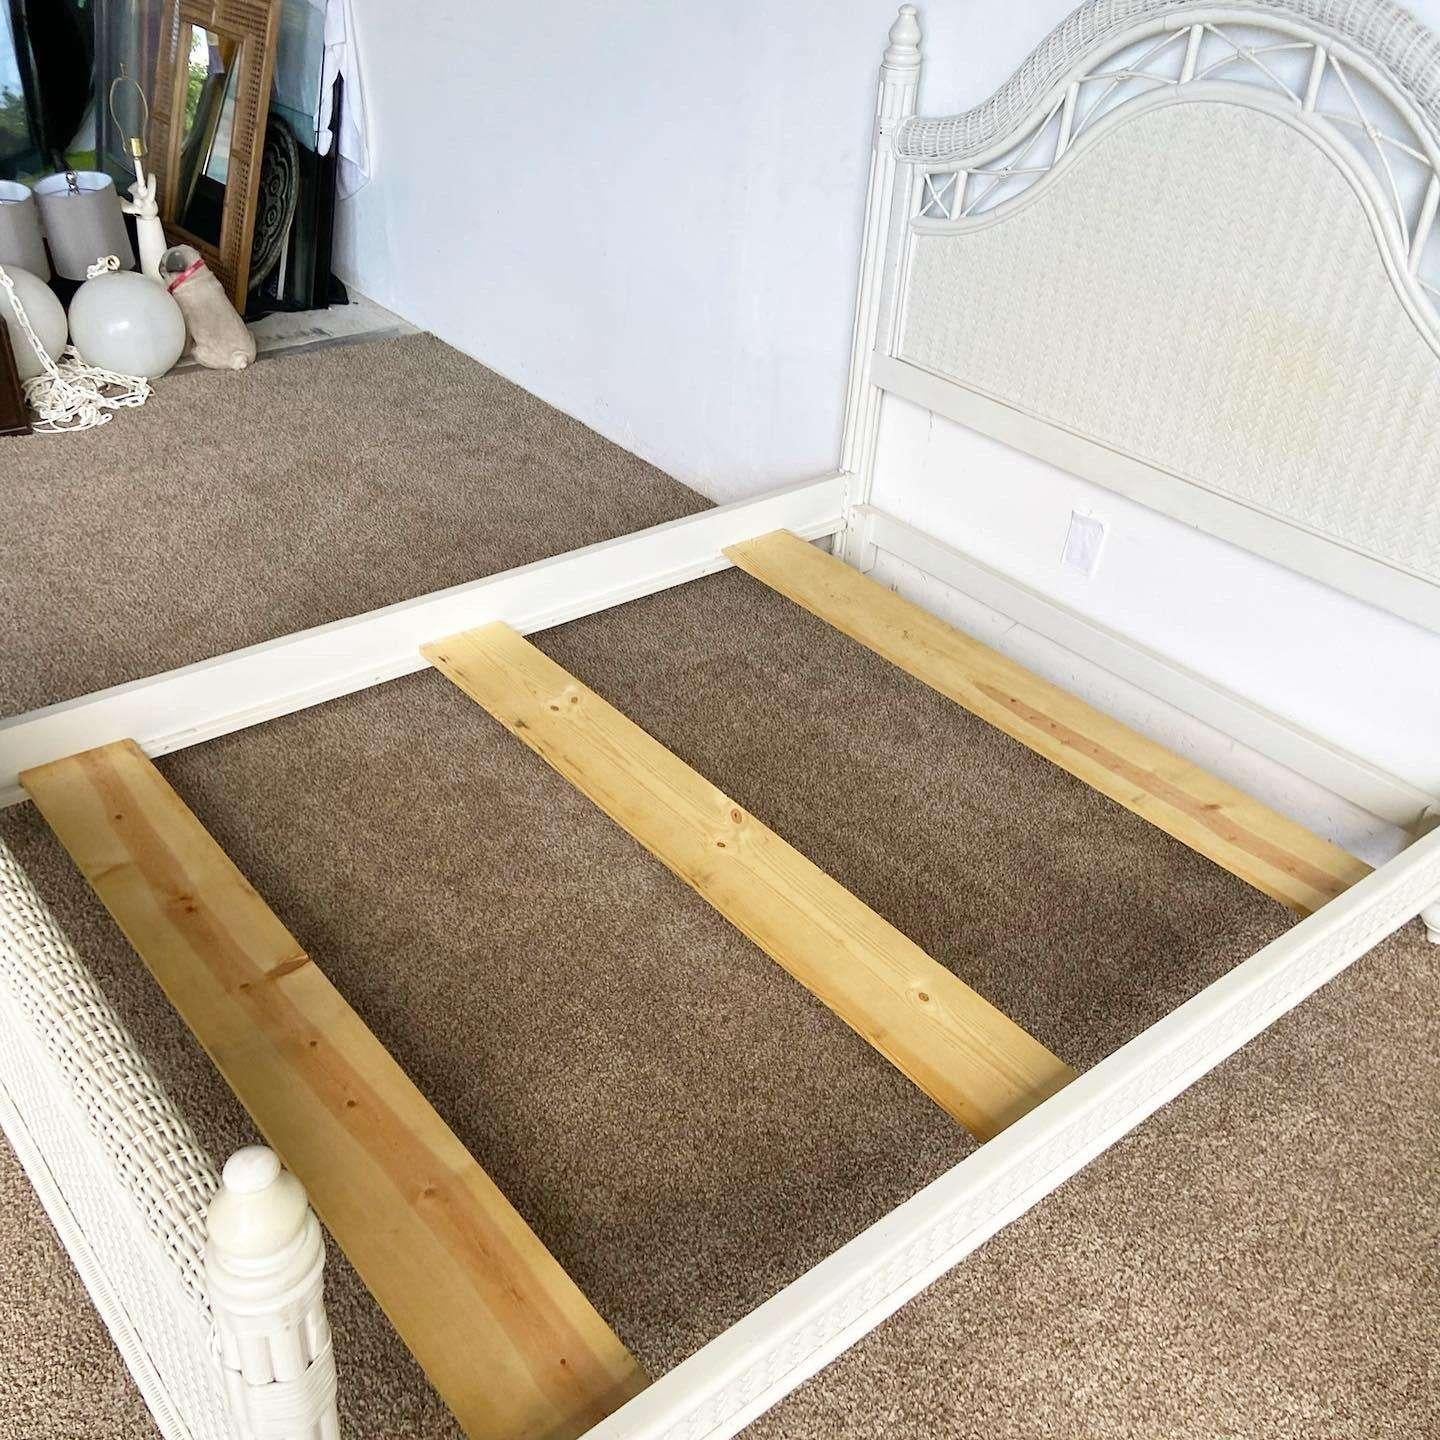 Indonesian Boho Chic White Wicker Bamboo Rattan and Herringbone Queen Size Bed Frame For Sale